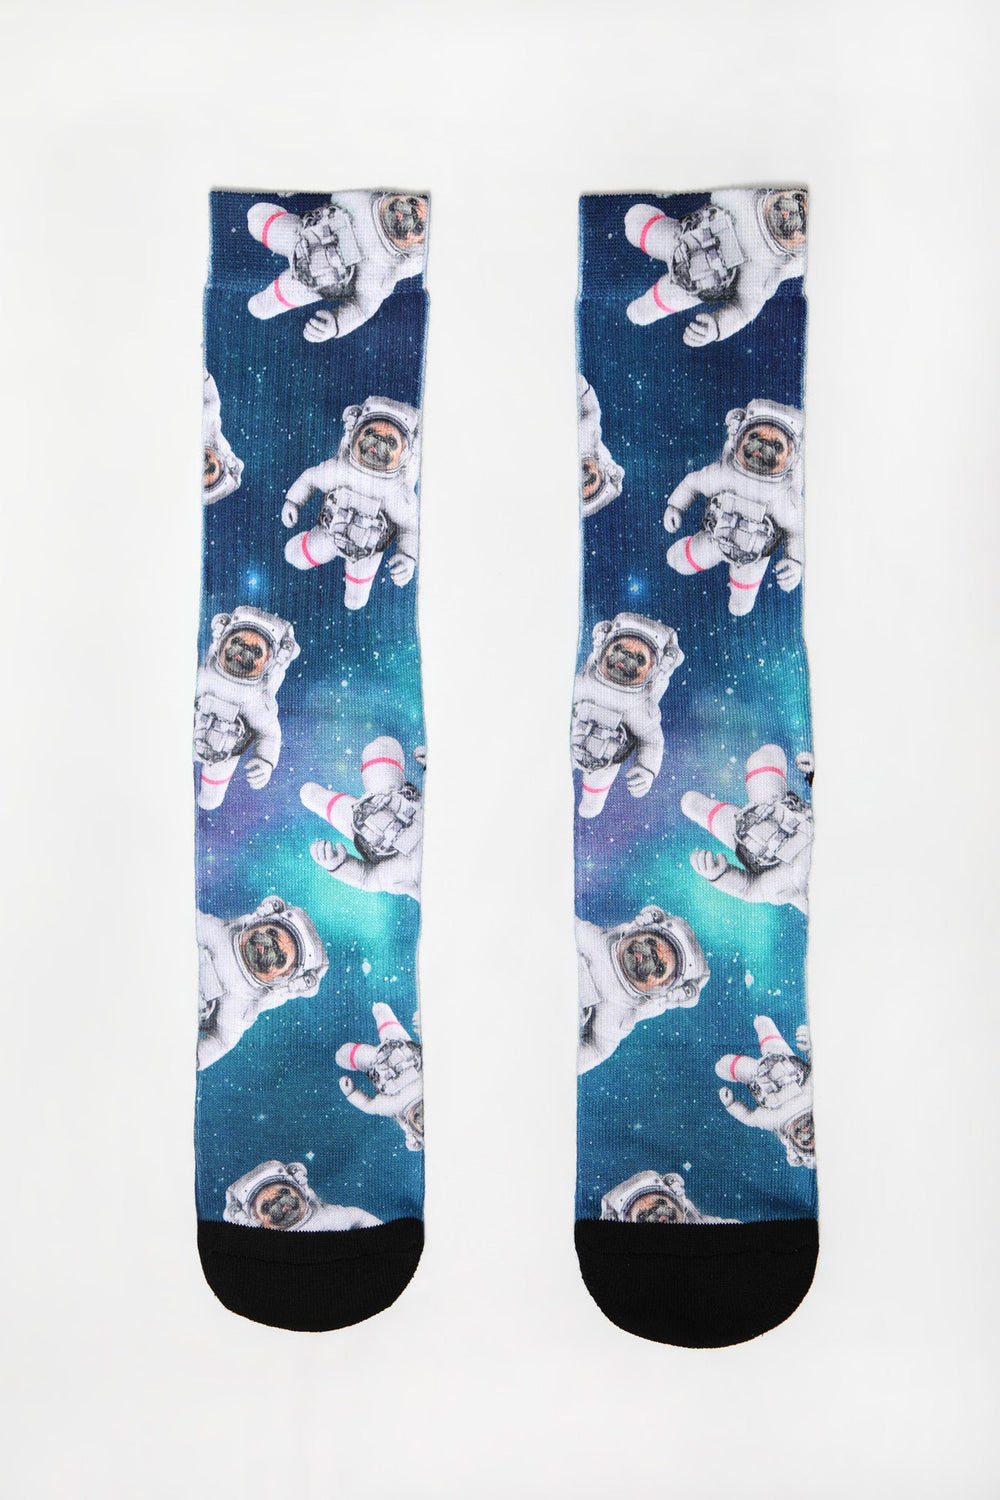 Chaussettes Pugs Astronautes Zoo York Homme Chaussettes Pugs Astronautes Zoo York Homme